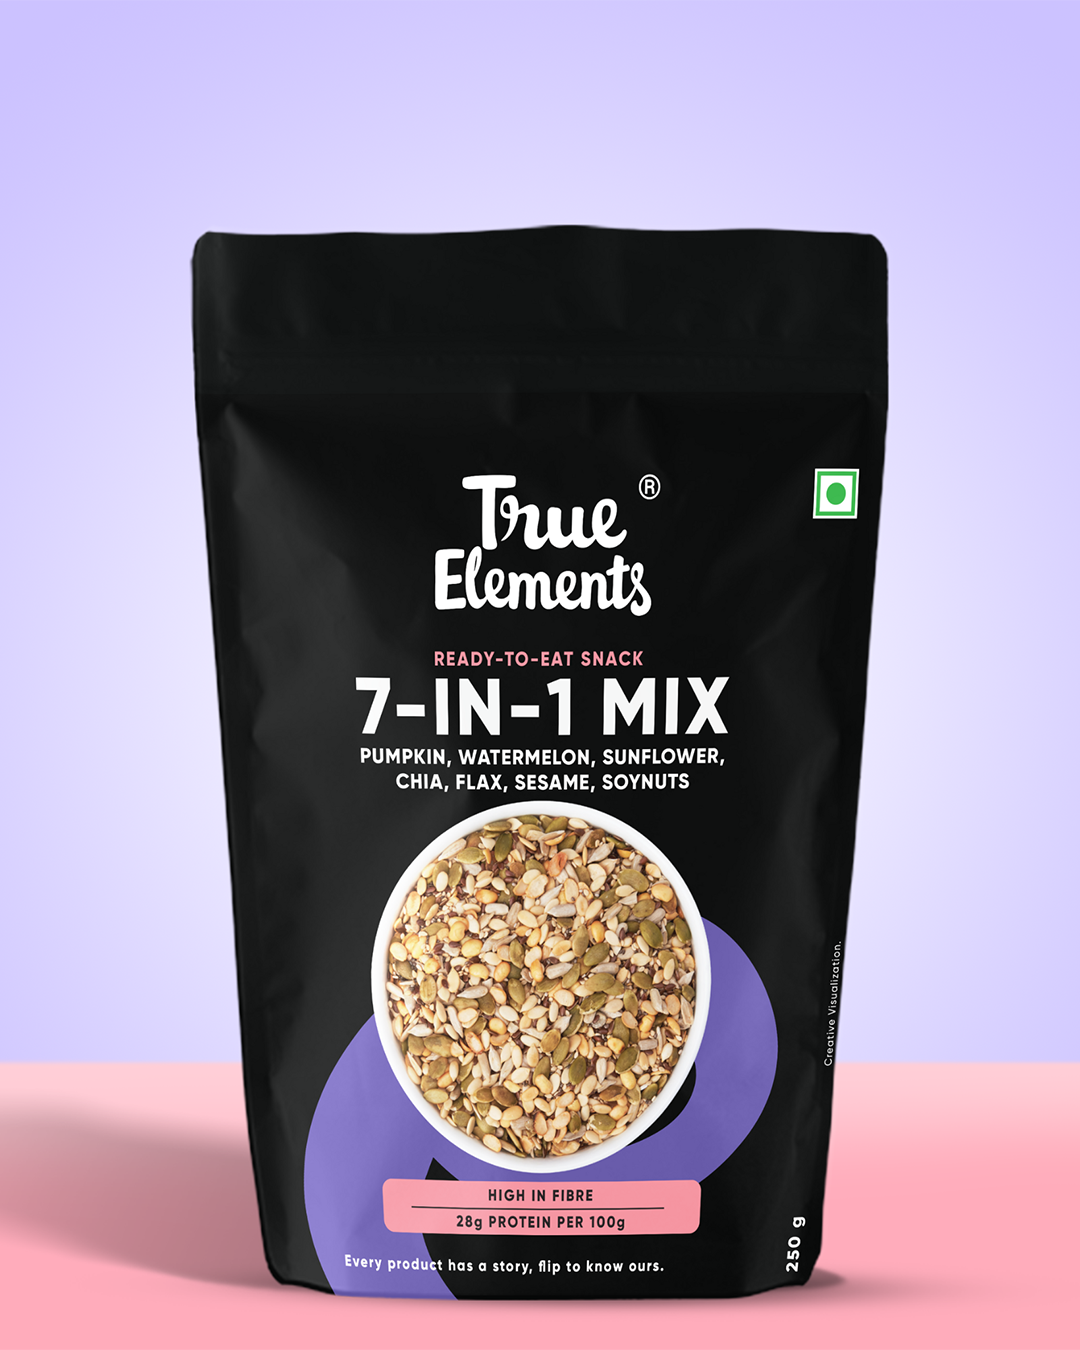 7 in 1 mix with pumpkin, watermelon, sunflower, chia, flax, sesame, & soynuts in 250g pouch.